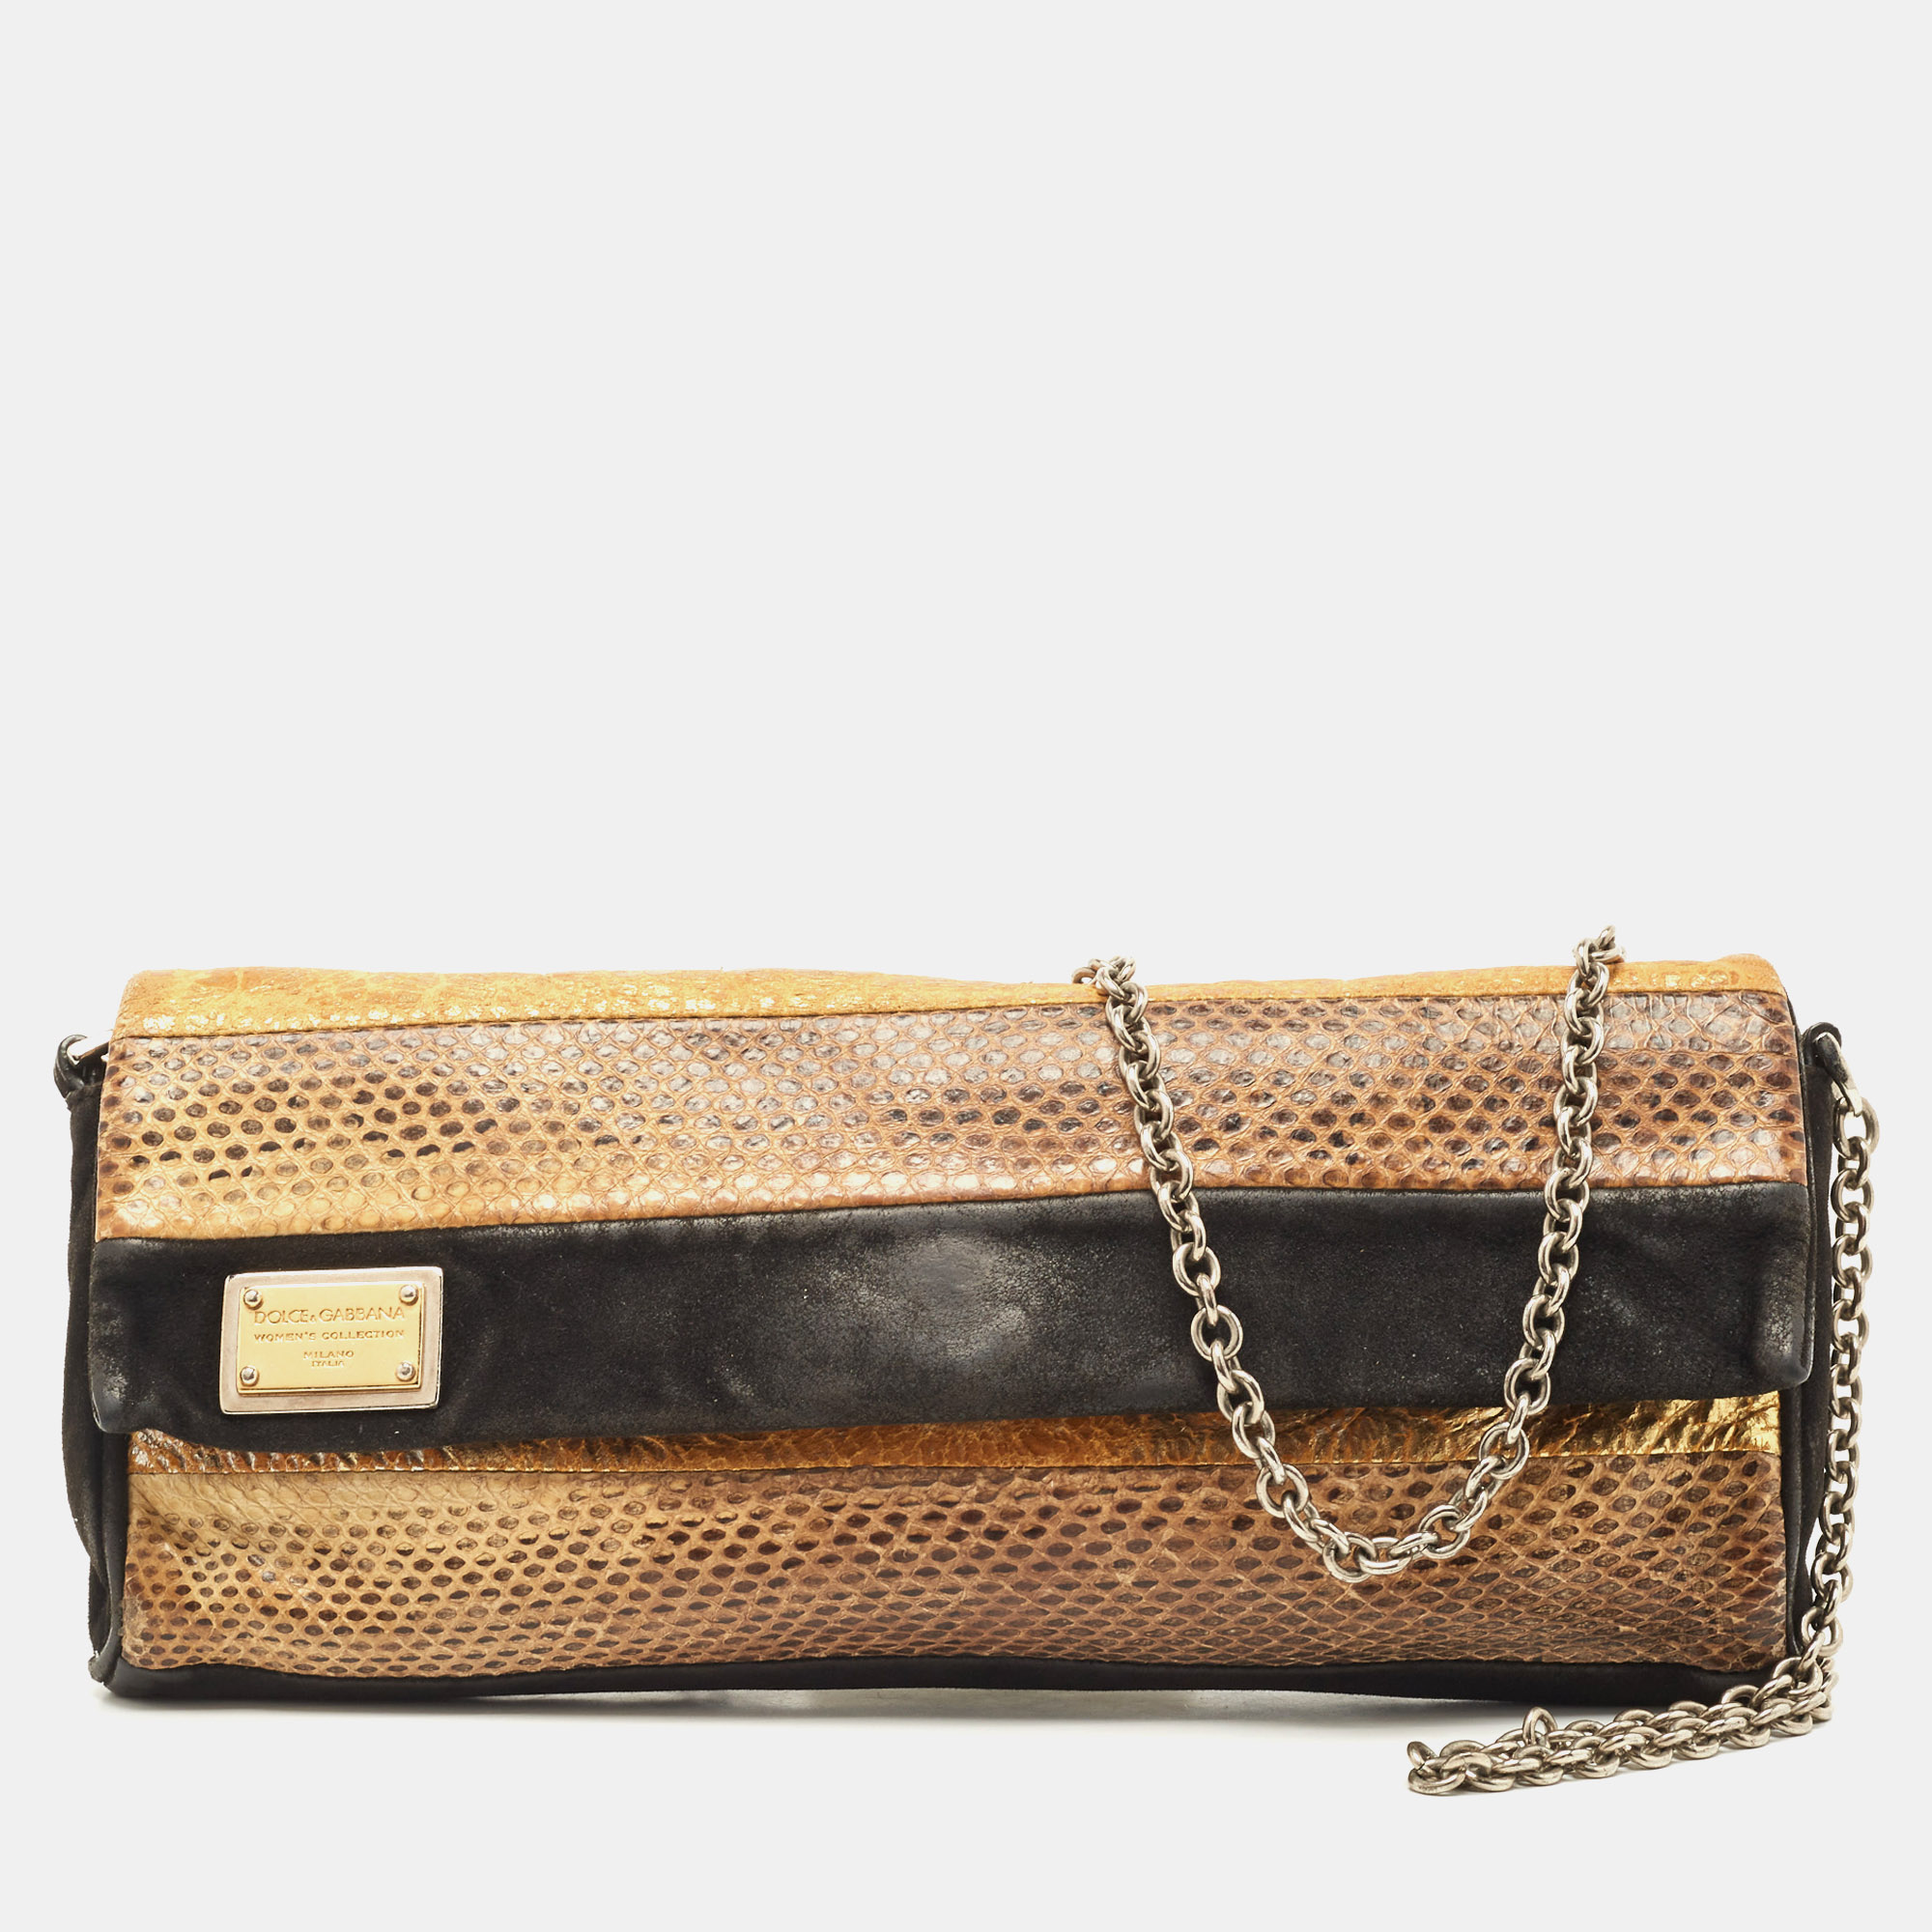 

Dolce & Gabbana Black/Brown Suede And Snakeskin Leather Chain Clutch